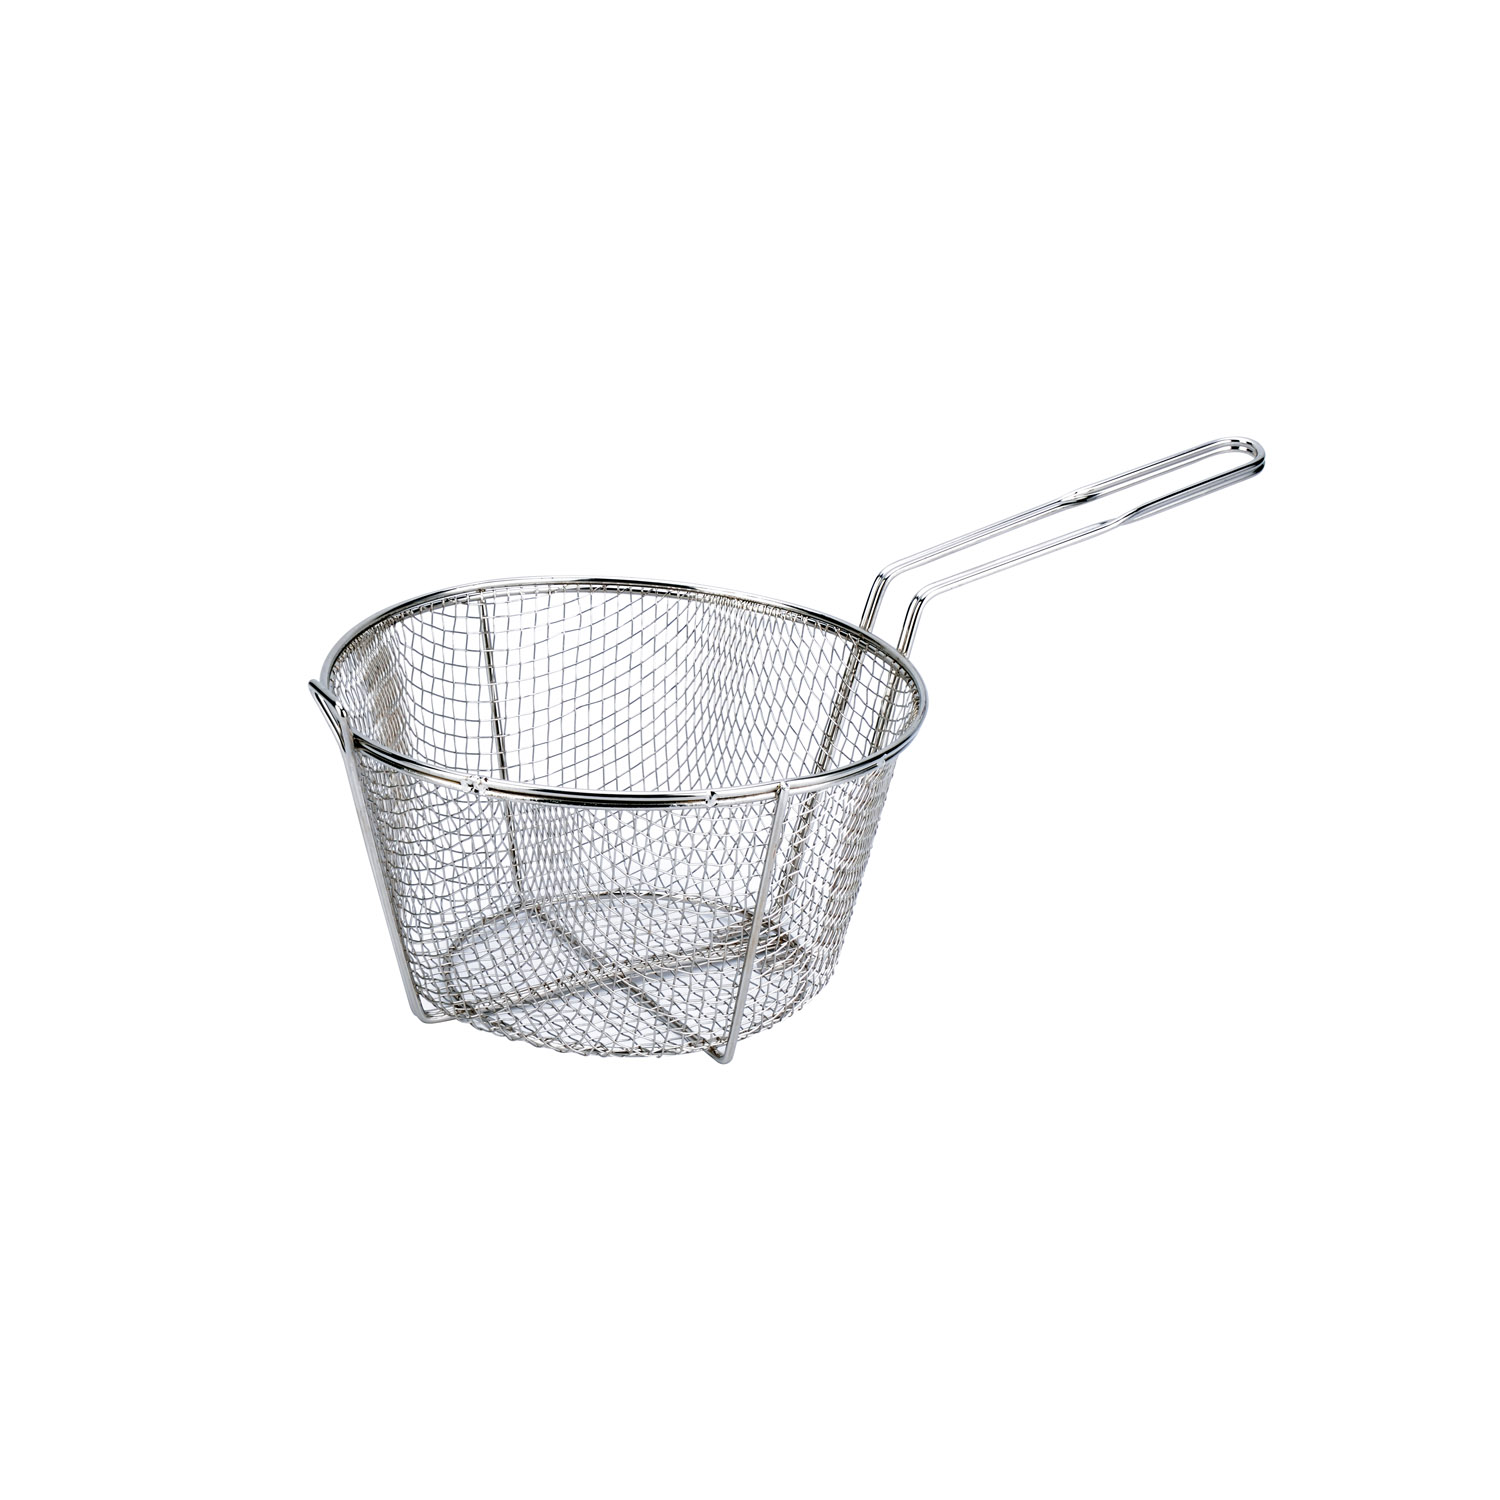 CAC China FBR4-9 Nickel-Plated Fry Basket, 1/4" Mesh Wire 9-1/2"Dia